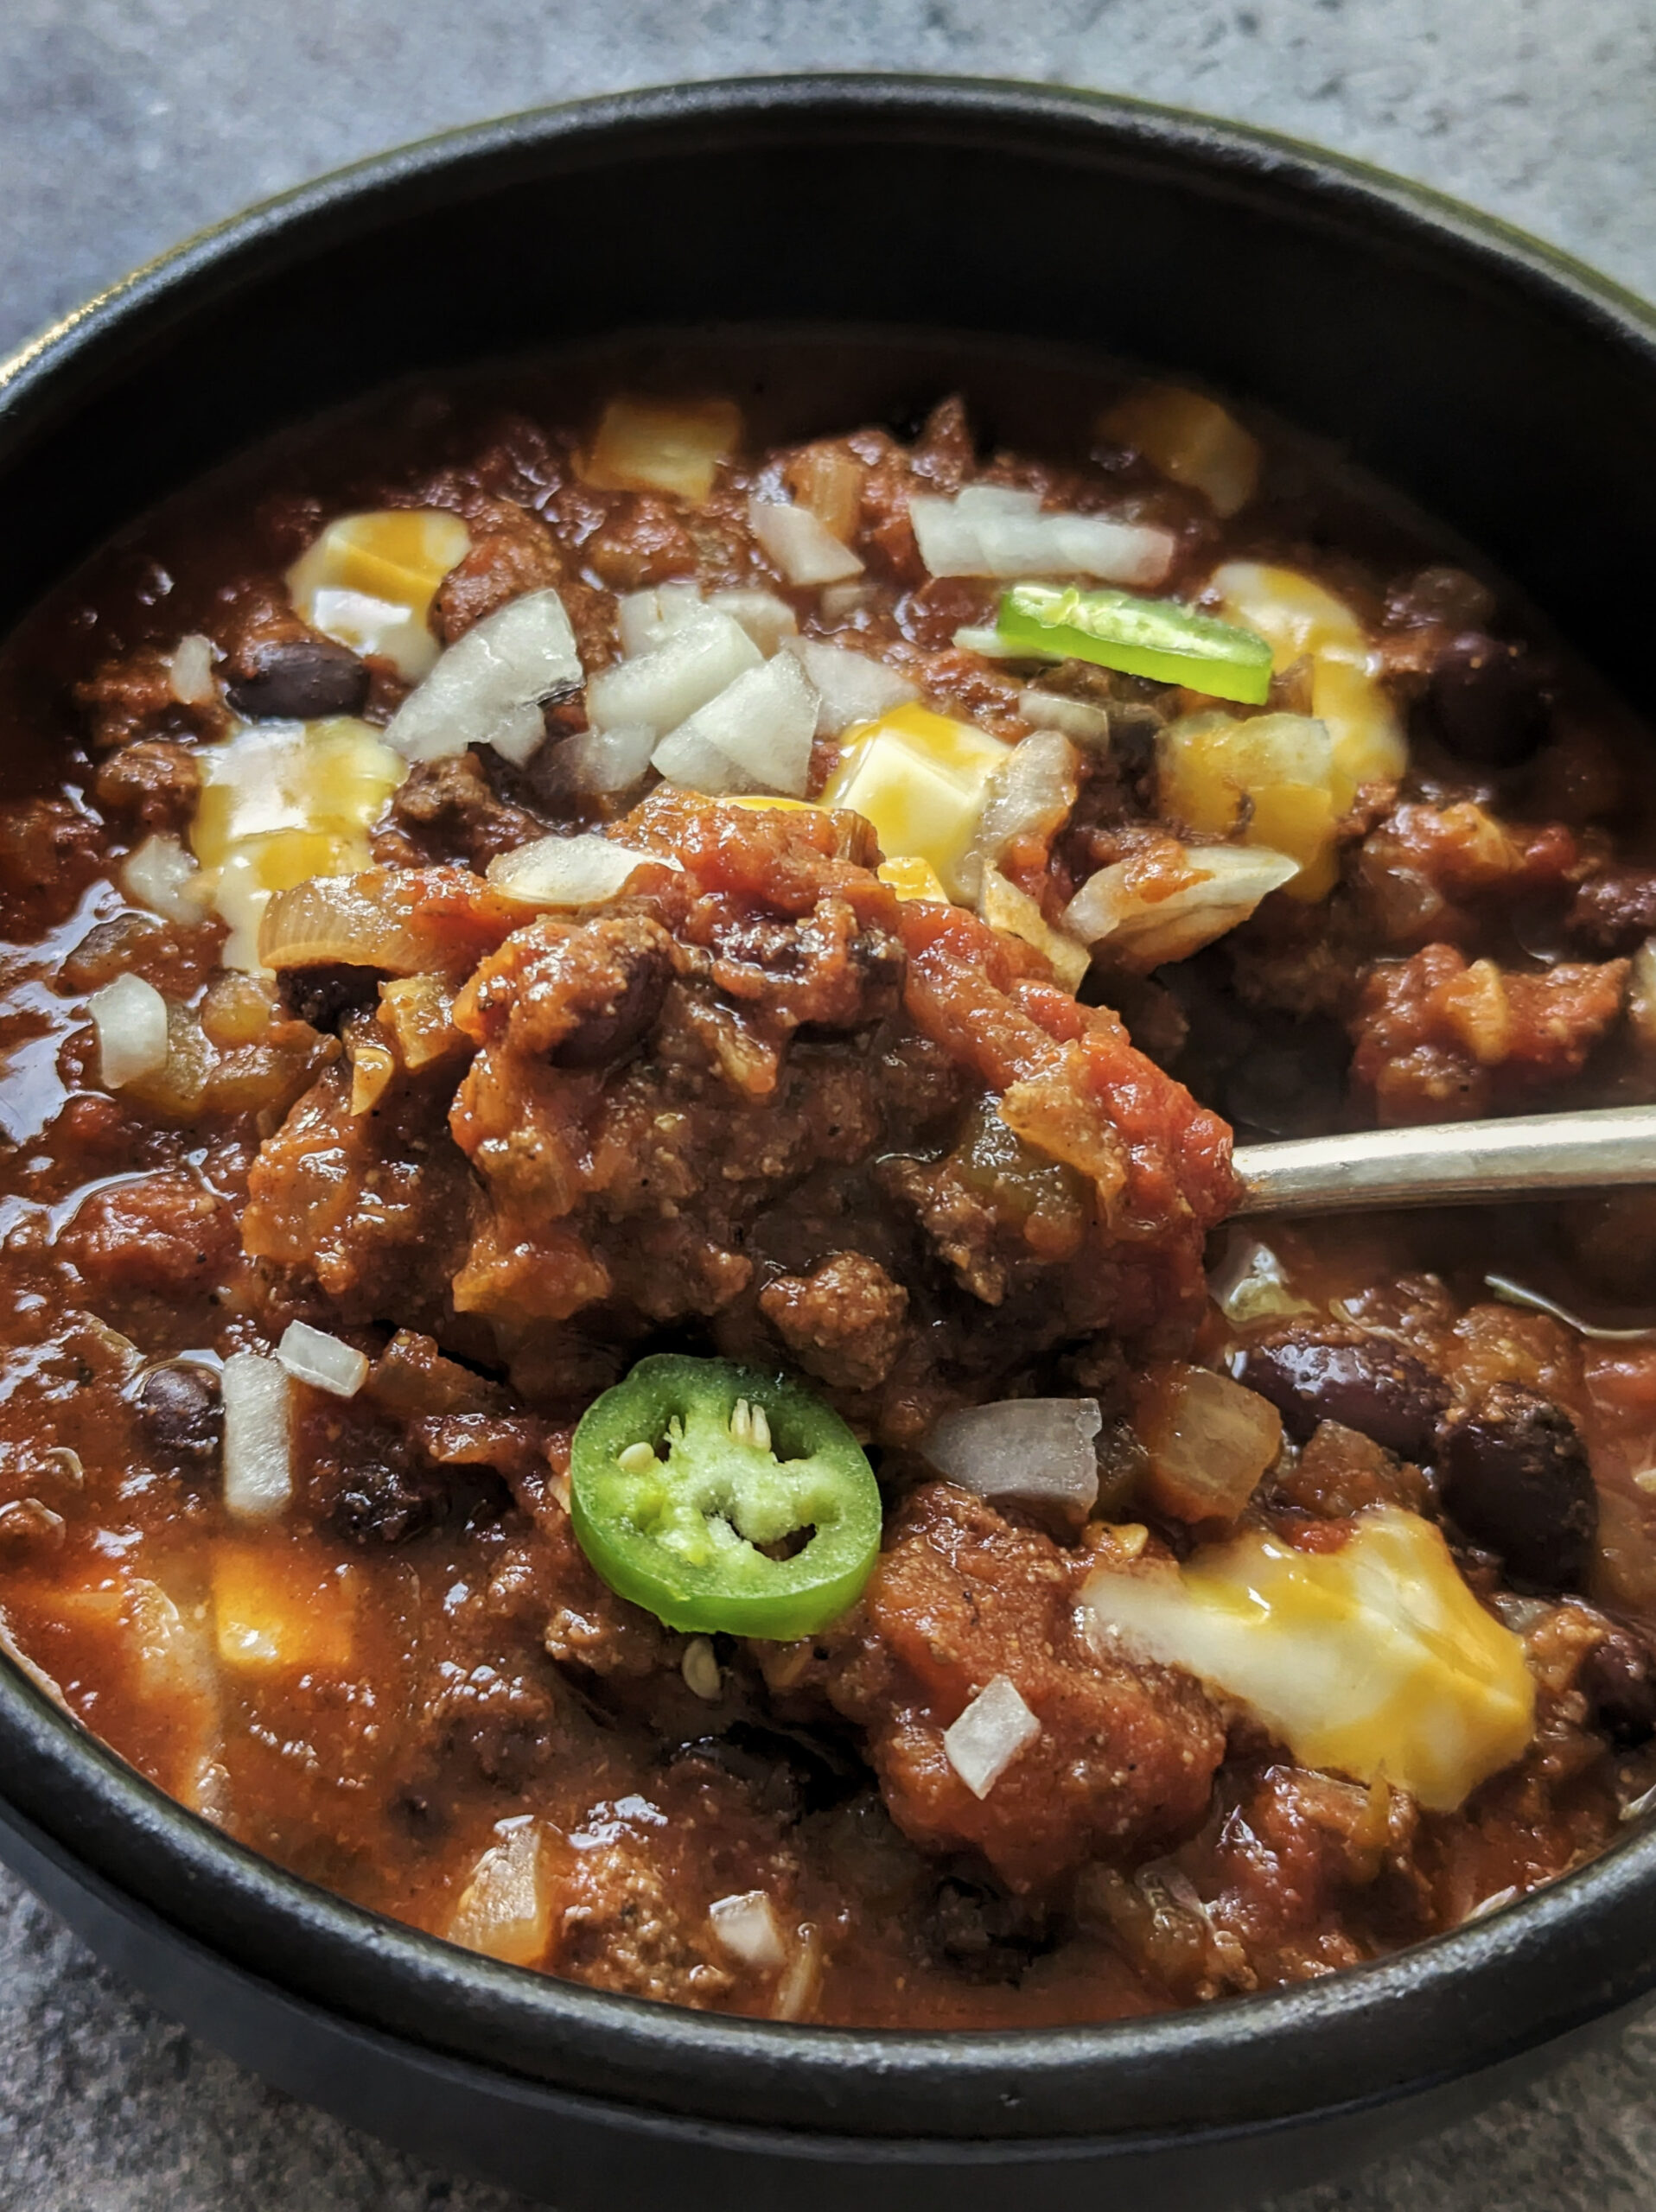 A bowl of elk chili topped with onions, chilies, and cubed cheese.